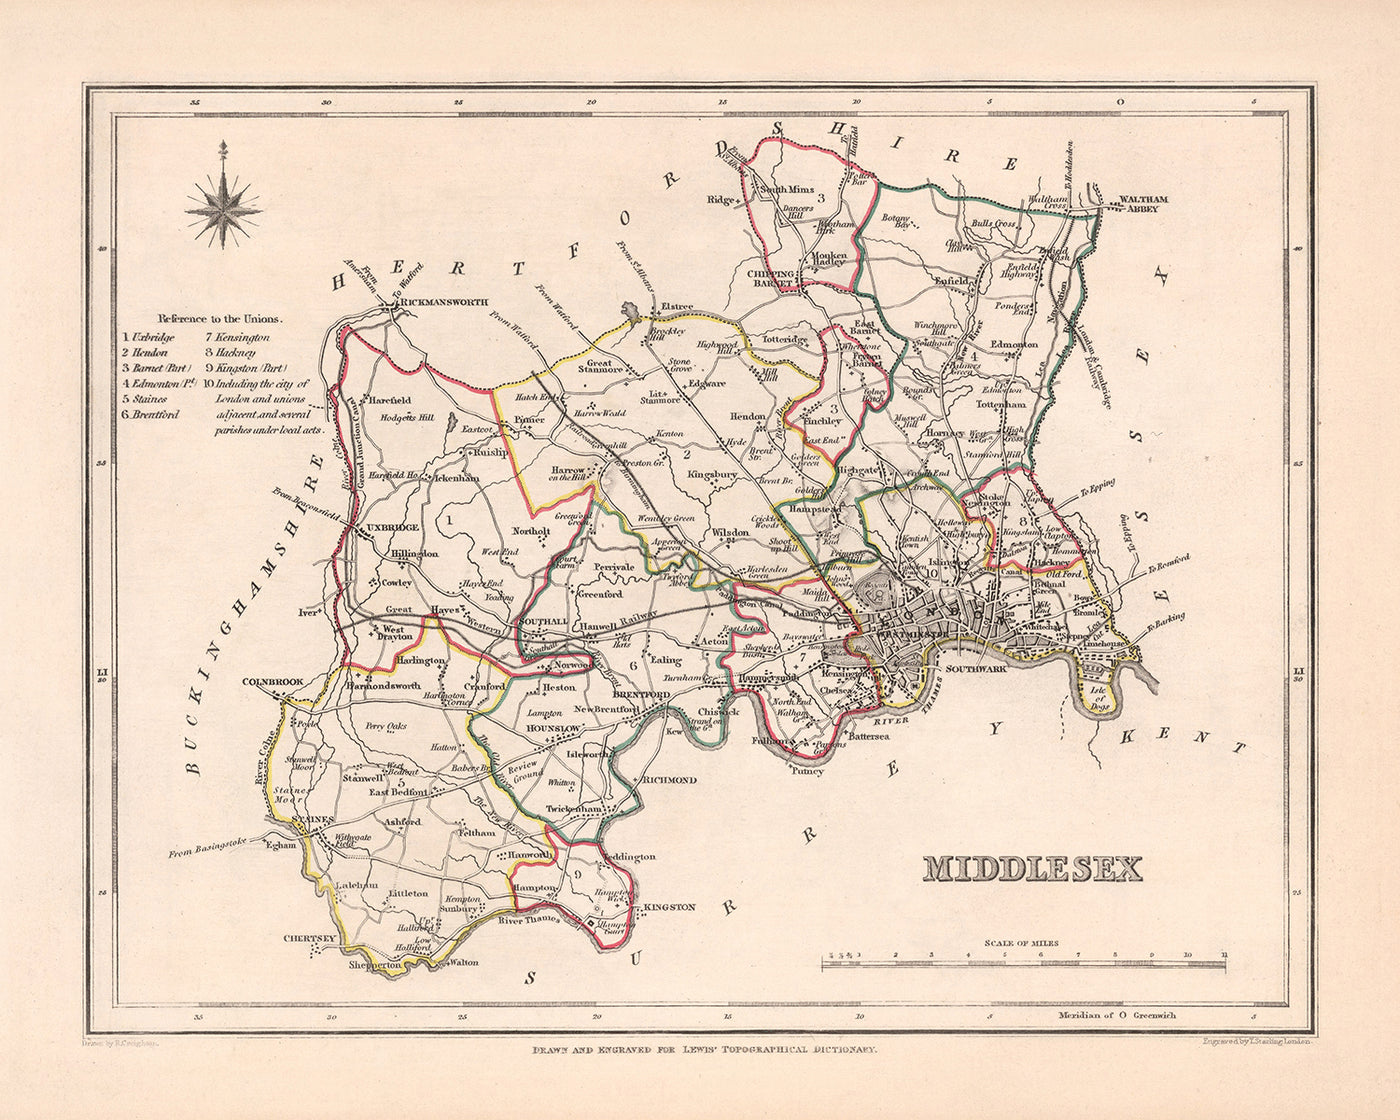 Old Map of Middlesex by Samuel Lewis, 1844: London, Westminster, Kensington, Chelsea, Richmond